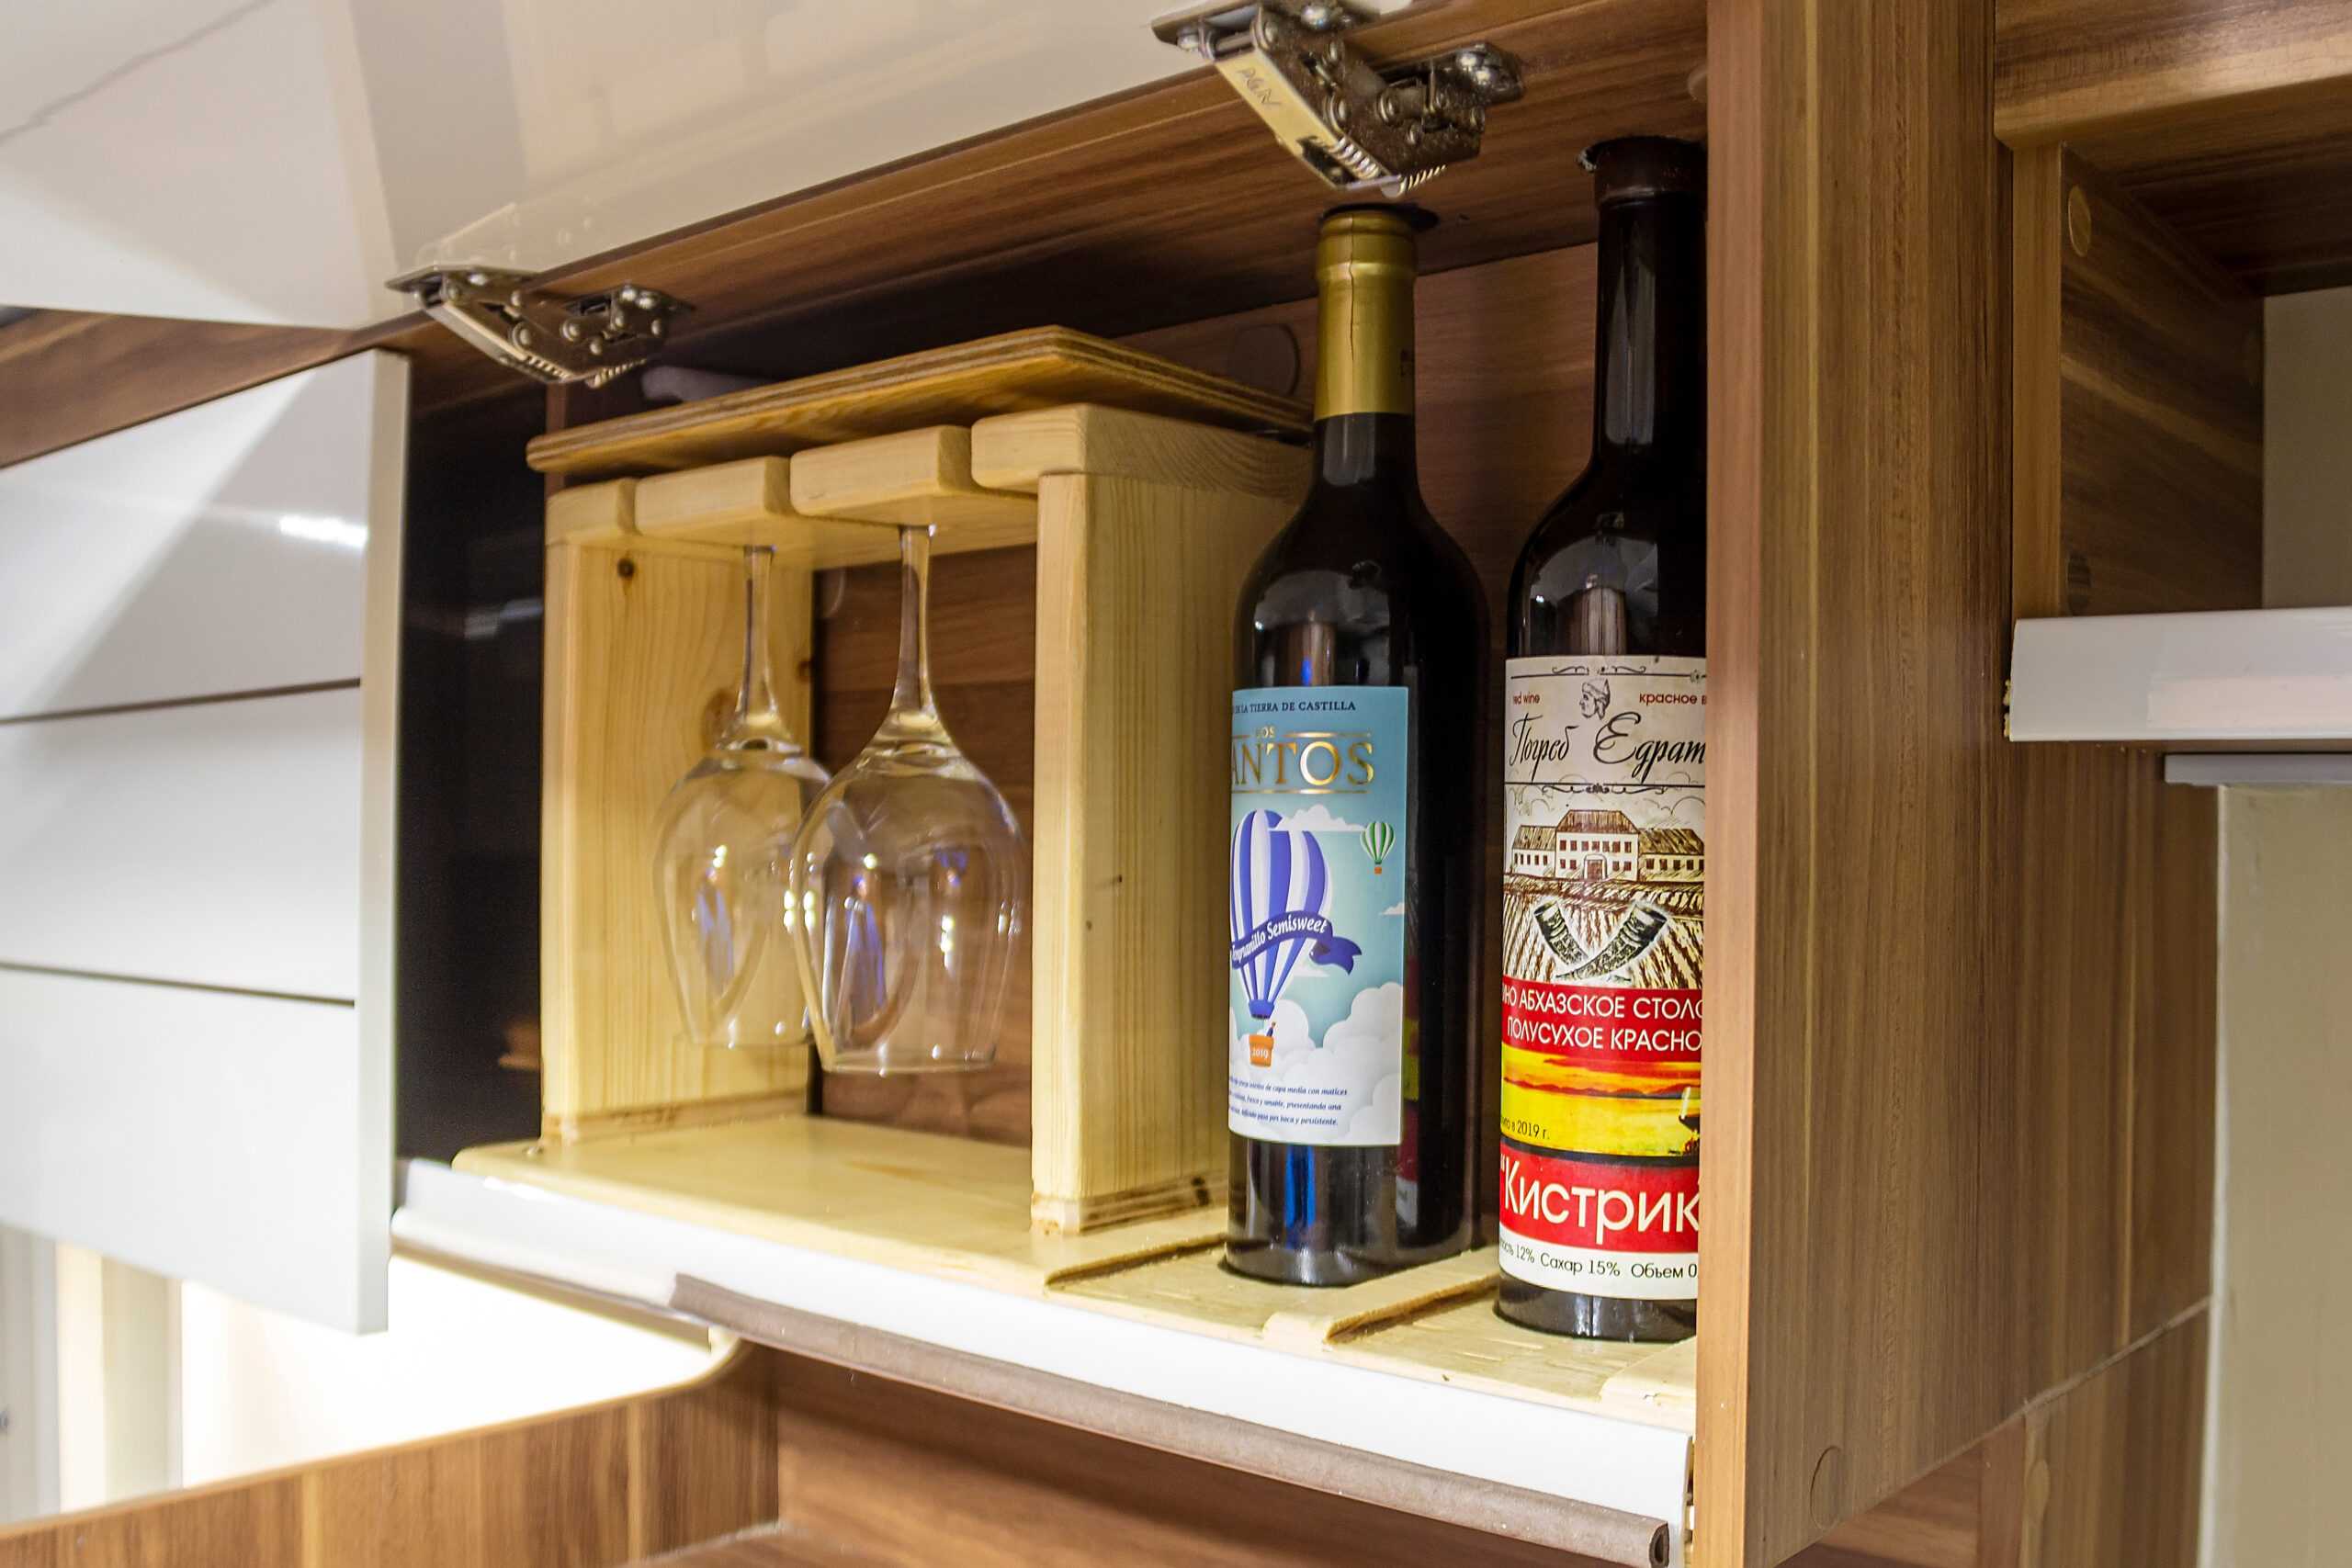 wine bottles and glasses in cabinet, feature image for unexpected uses for everyday items while RVing